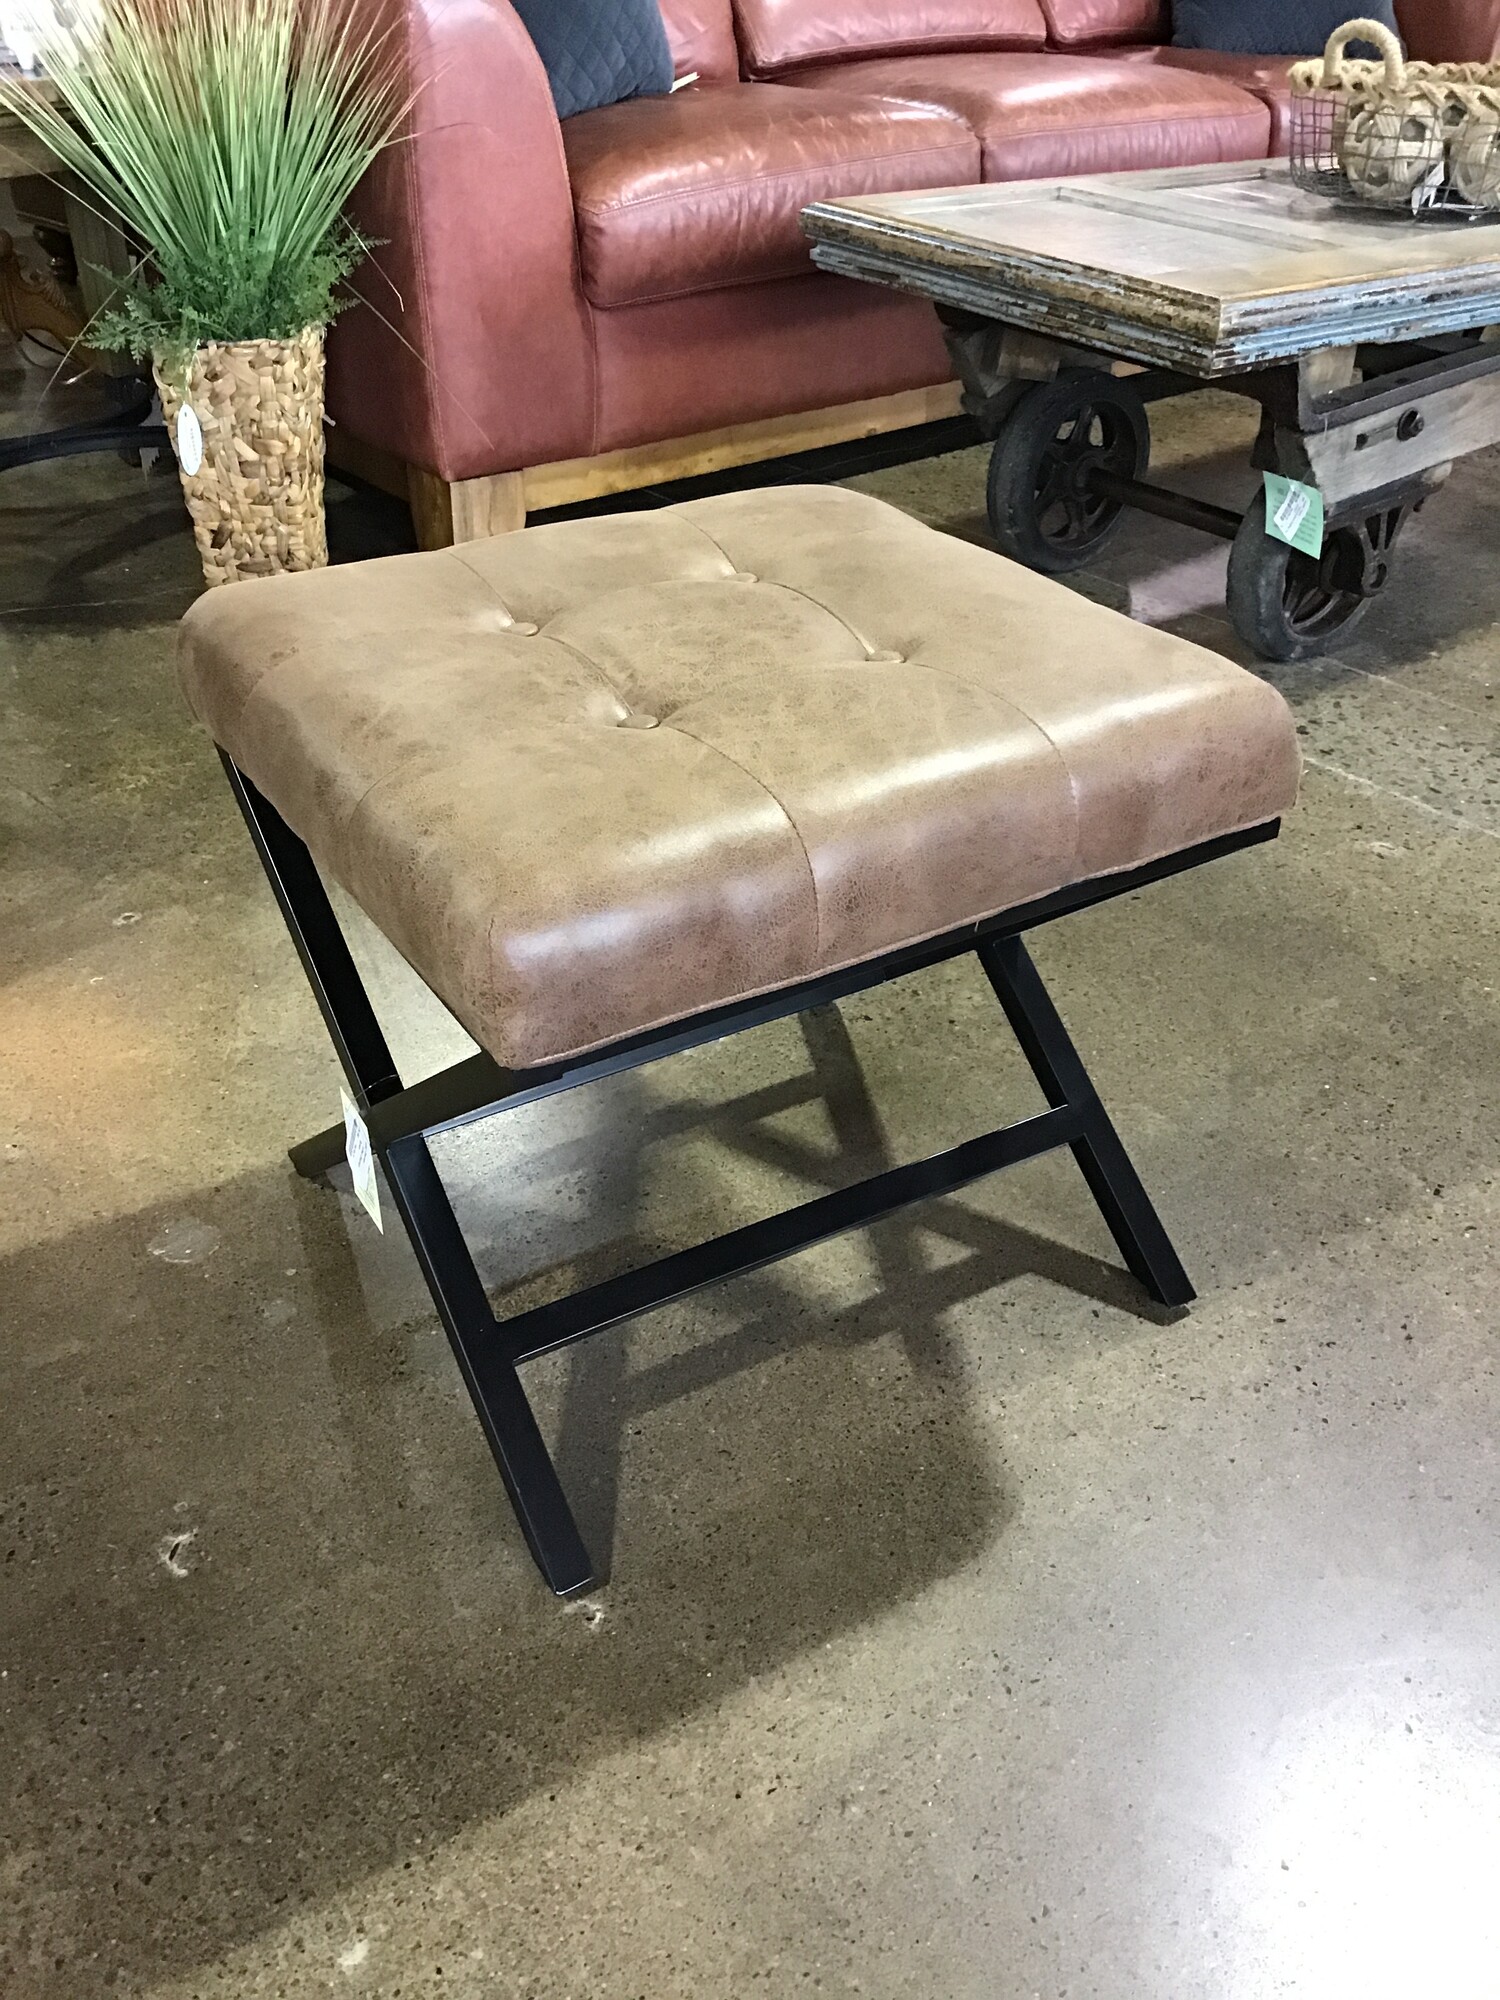 Brown faux leather upholstery and metal base ensure durability.  Tufted detailing creates a visual appeal
Ottoman can serve as a footrest, makeup stool, or an accent piece!  Buy them both and push together as a coffee table!

Matches #144946

Dimensions:  19x19x18